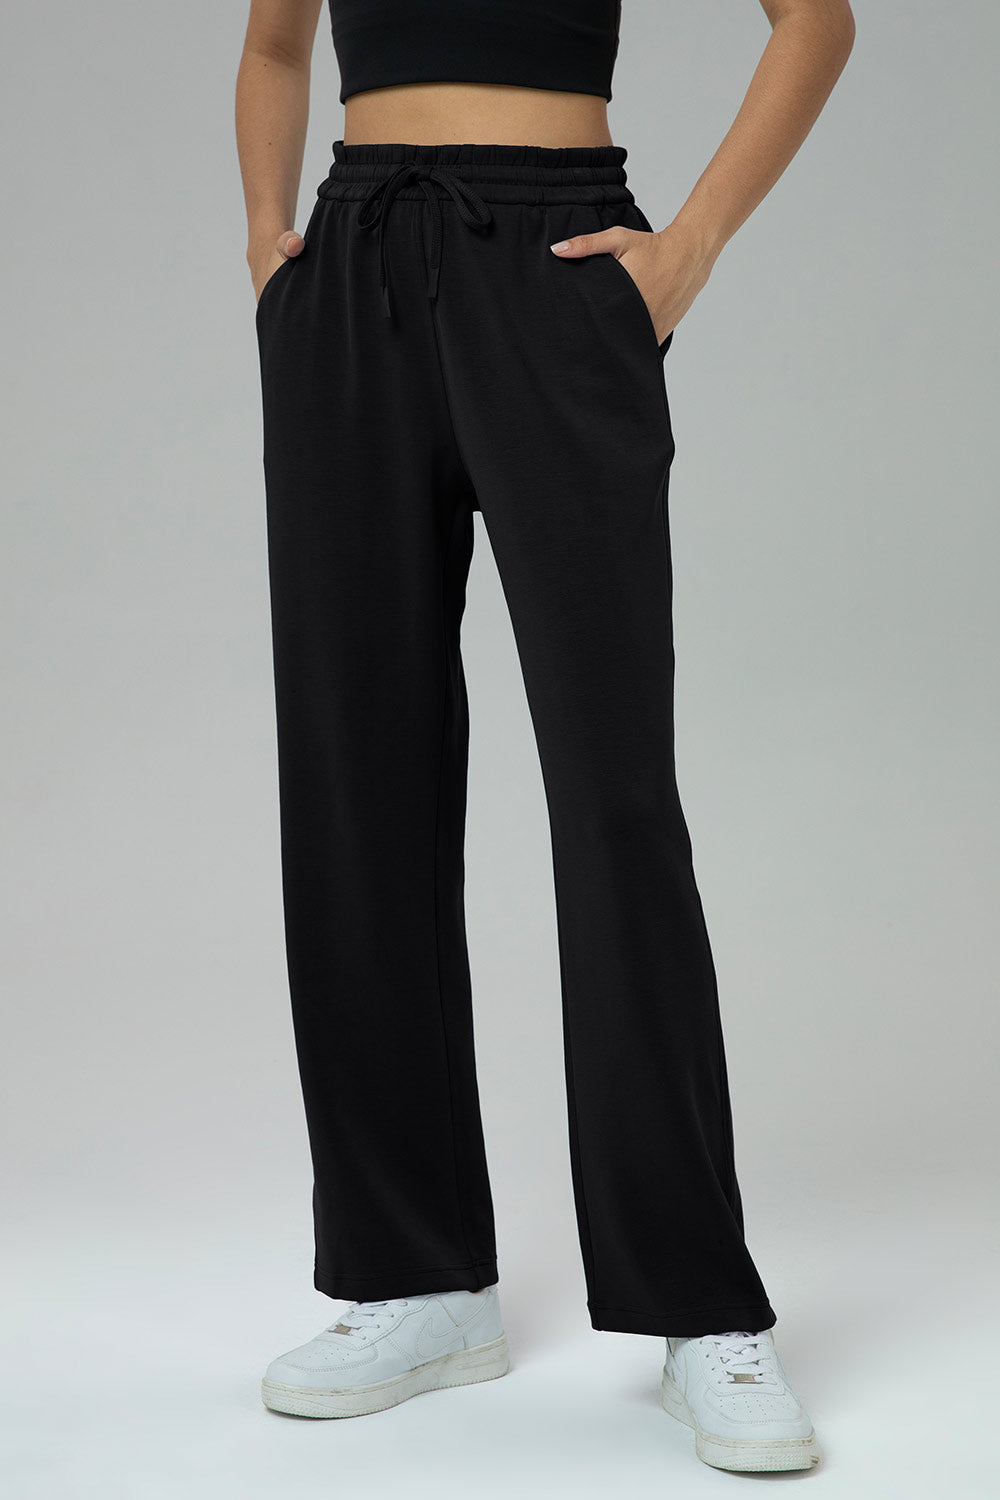 Dreamlux Flared Leggings with Zippered Pockets 29.5 / 31.5 Inseam